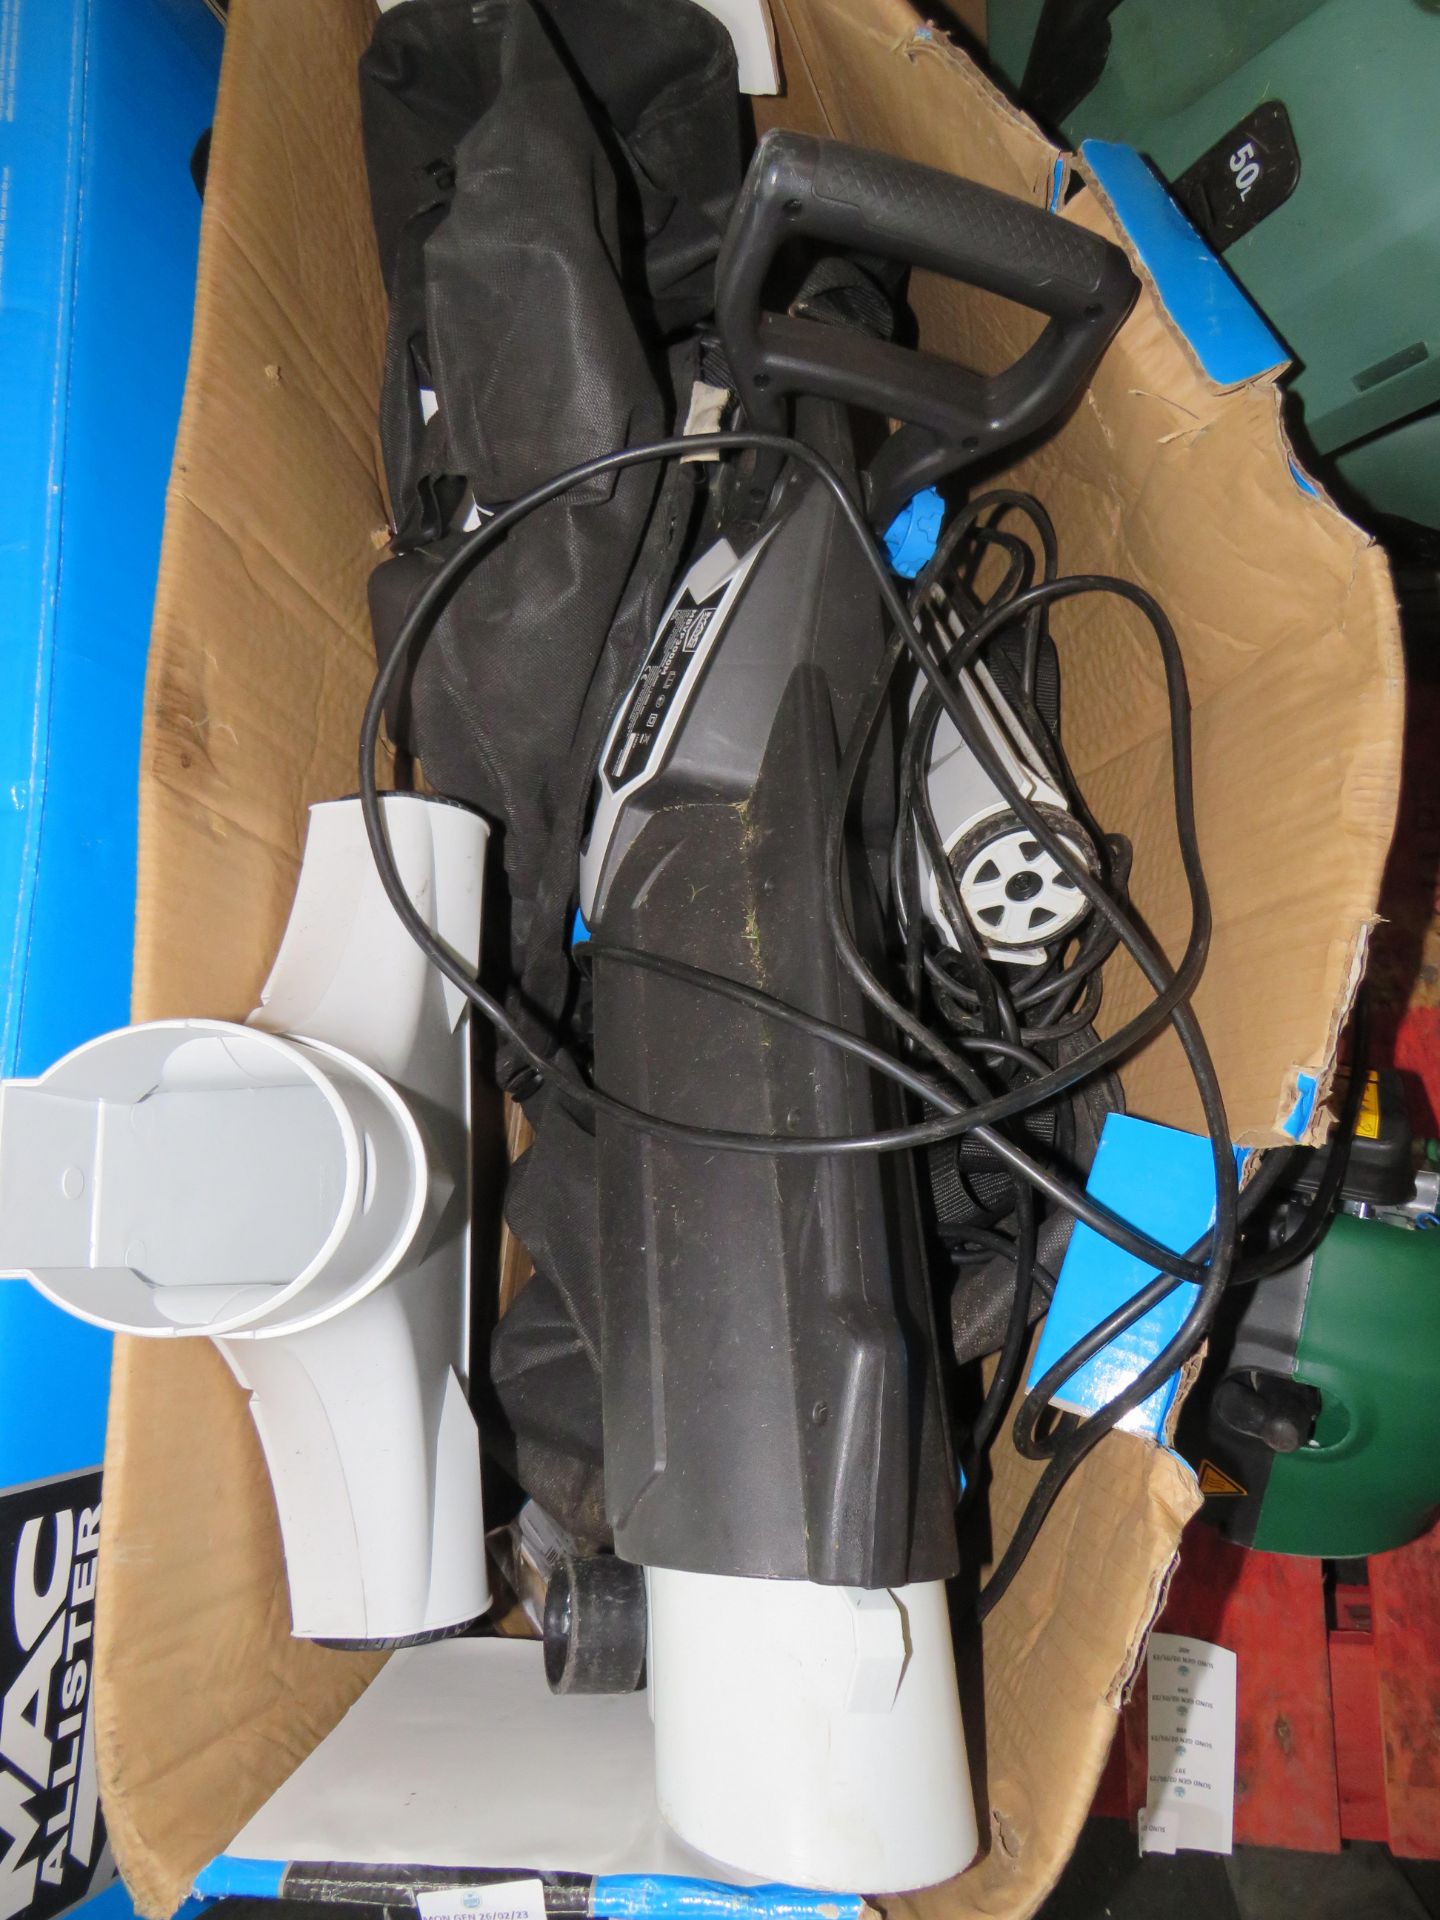 Mac Allister - 3000W Corded Electric Blower Vacuum - May Have Attachments Missing, Untested, Used